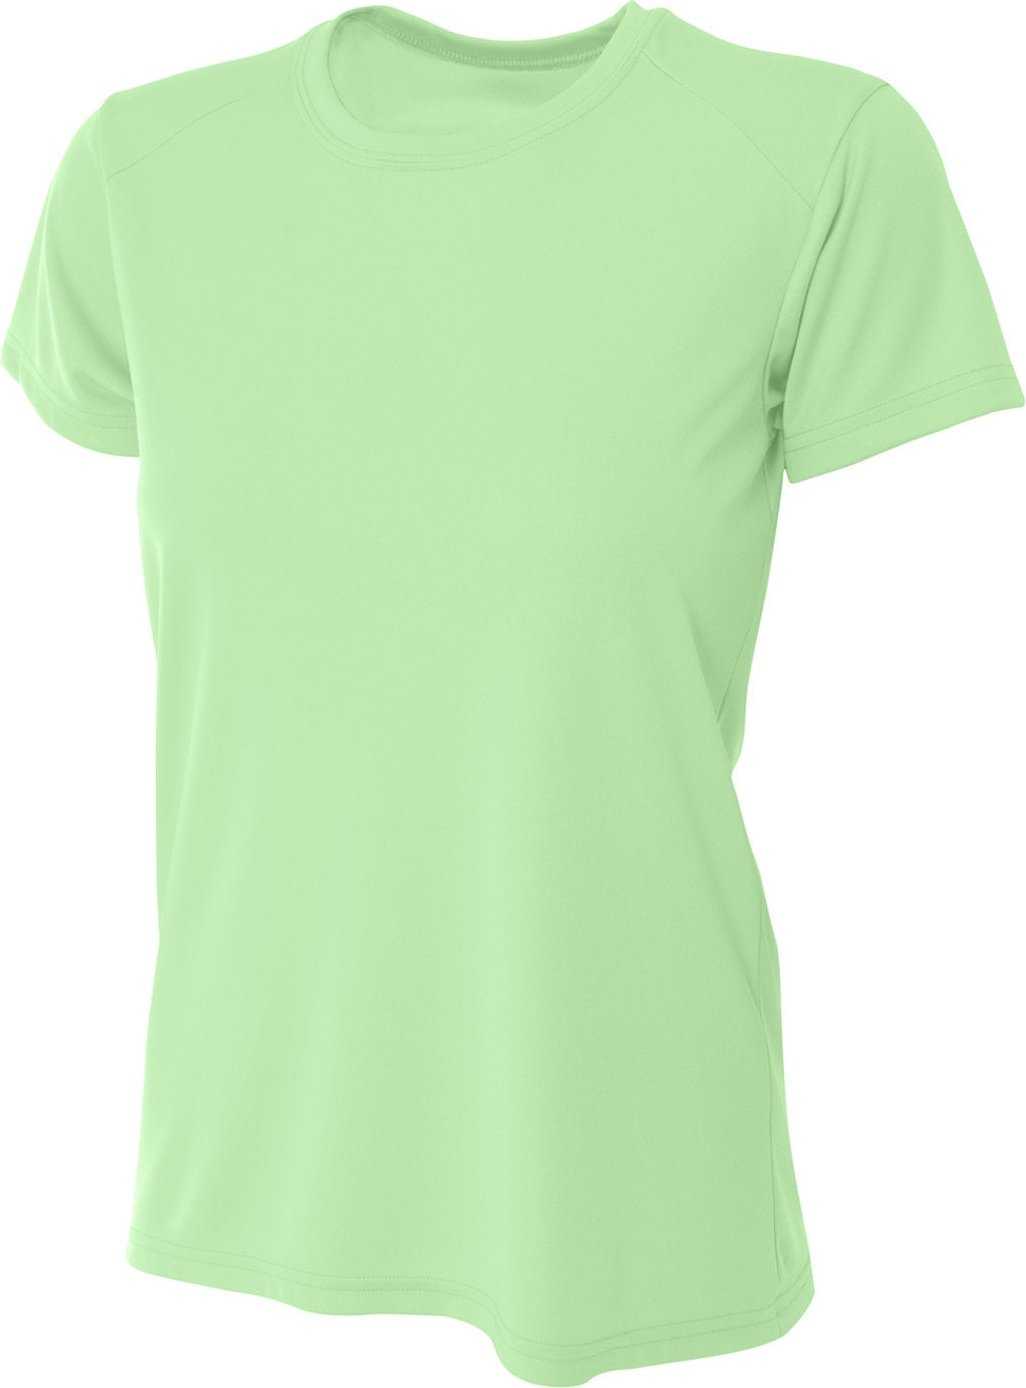 A4 NW3201 Ladies' Cooling Performance T-Shirt - LIGHT LIME - HIT a Double - 2